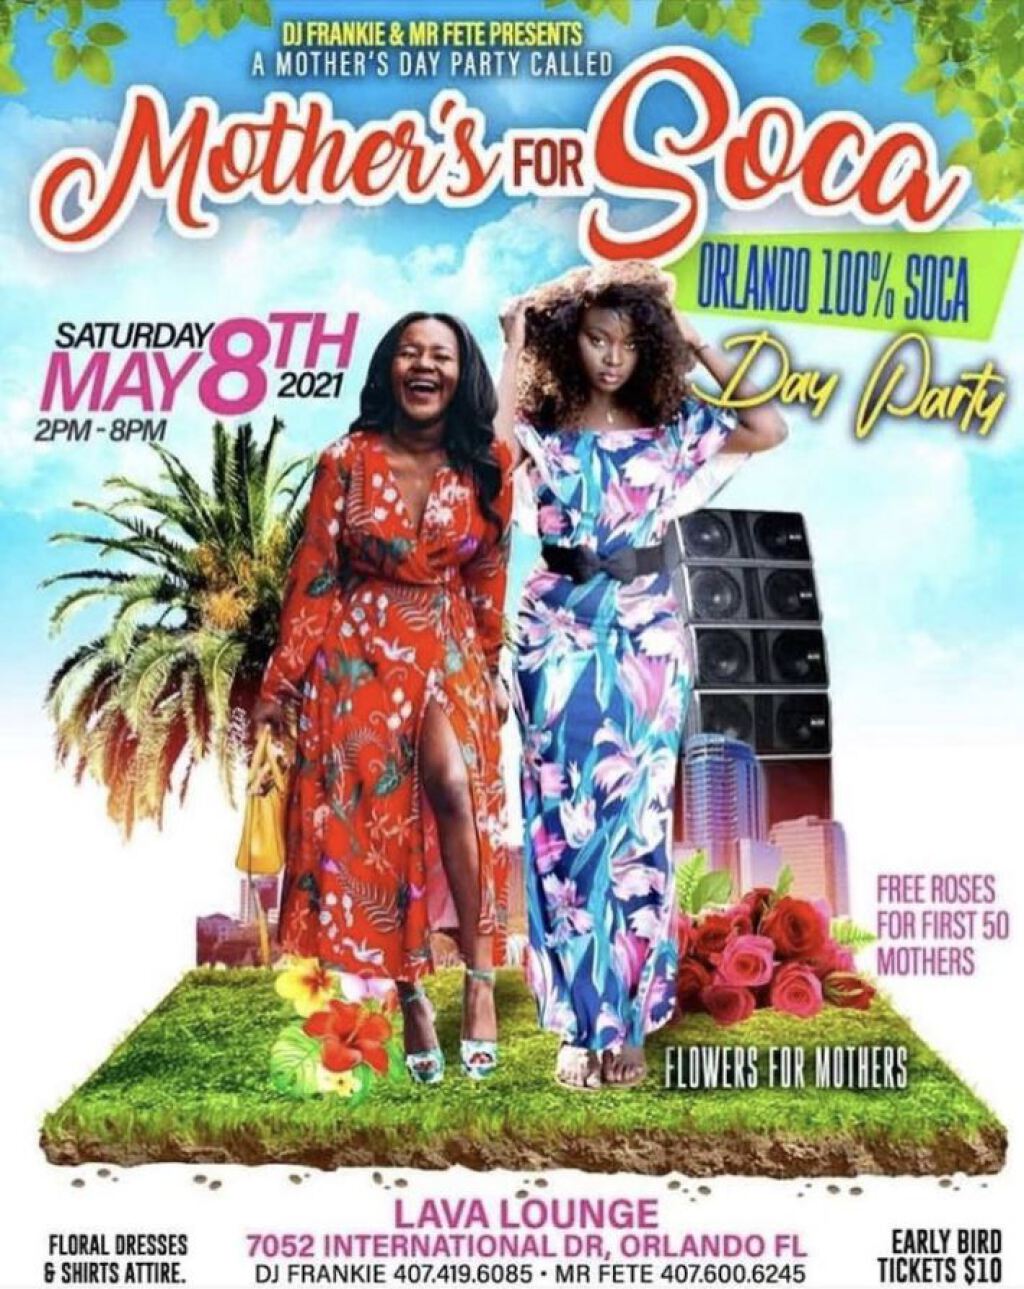 Mothers For Soca flyer or graphic.